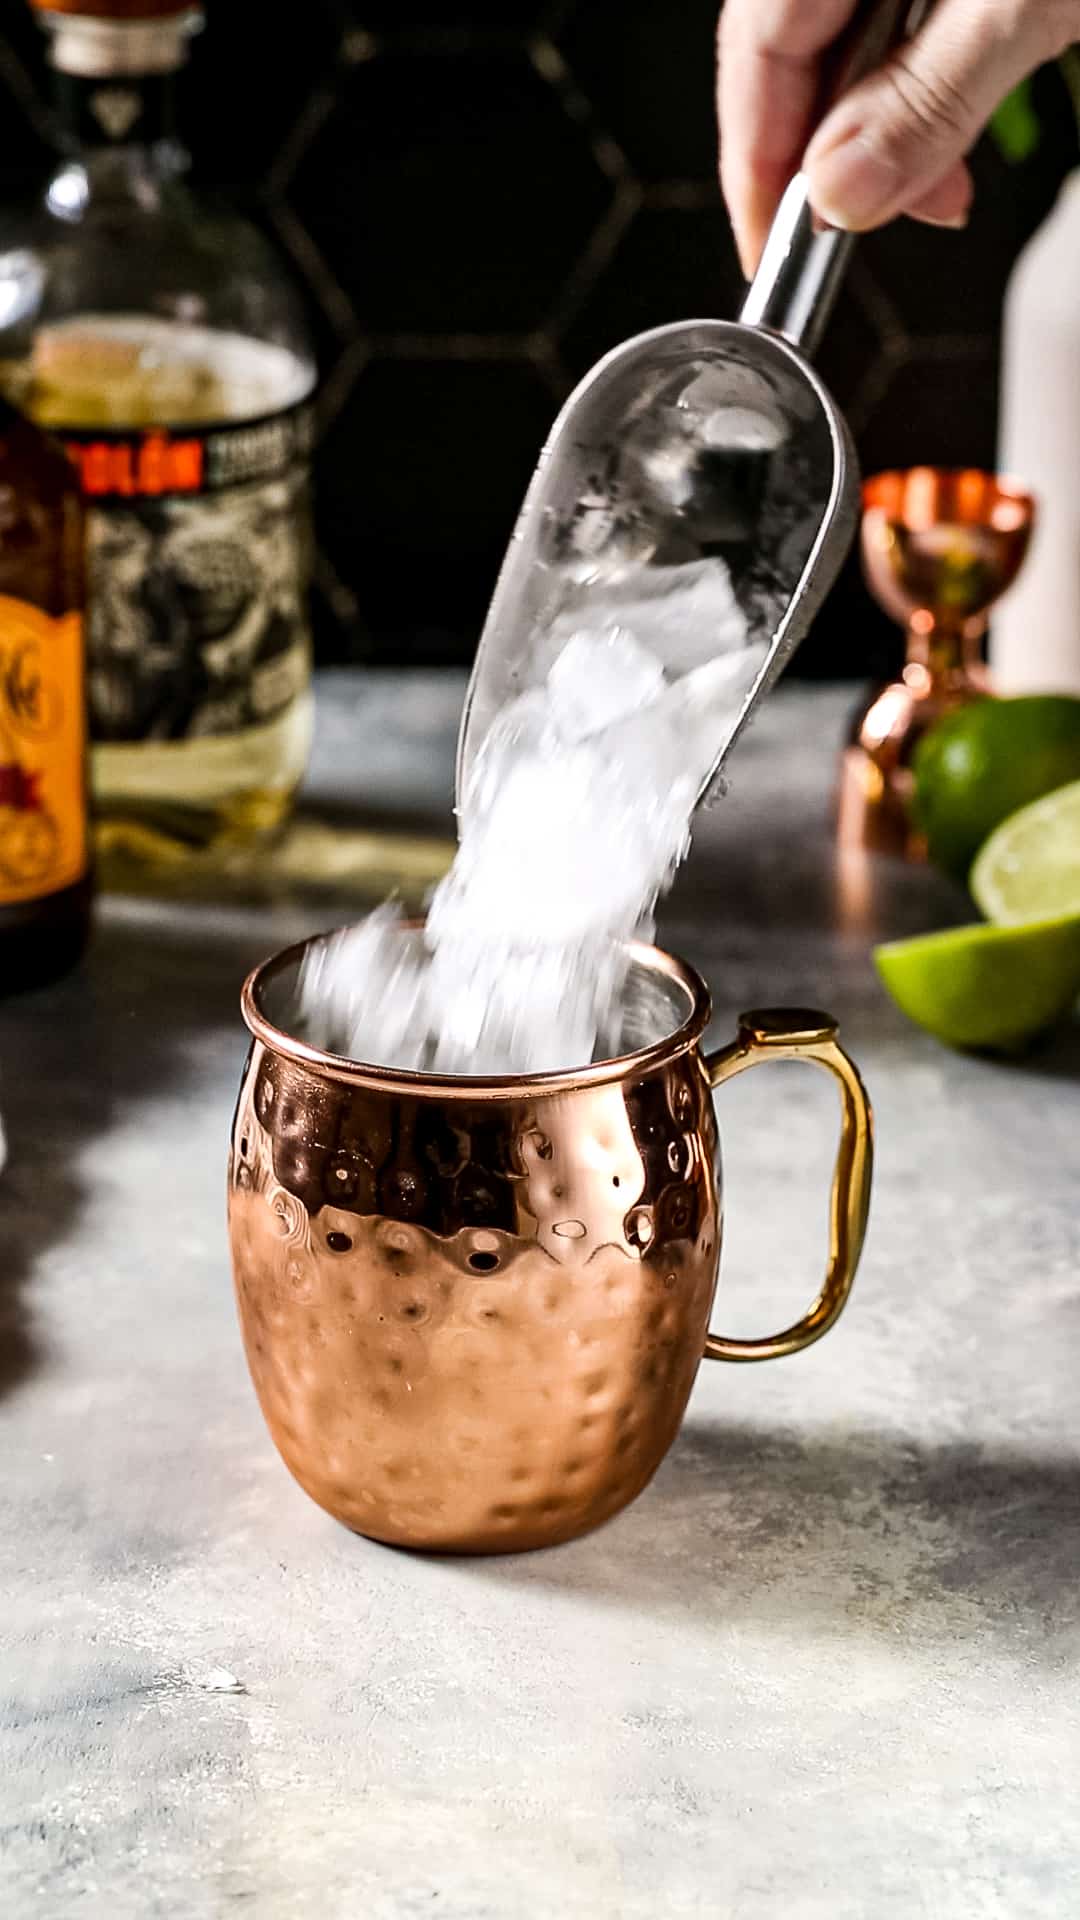 Hand using an ice scoop to add crushed ice to a copper mug.